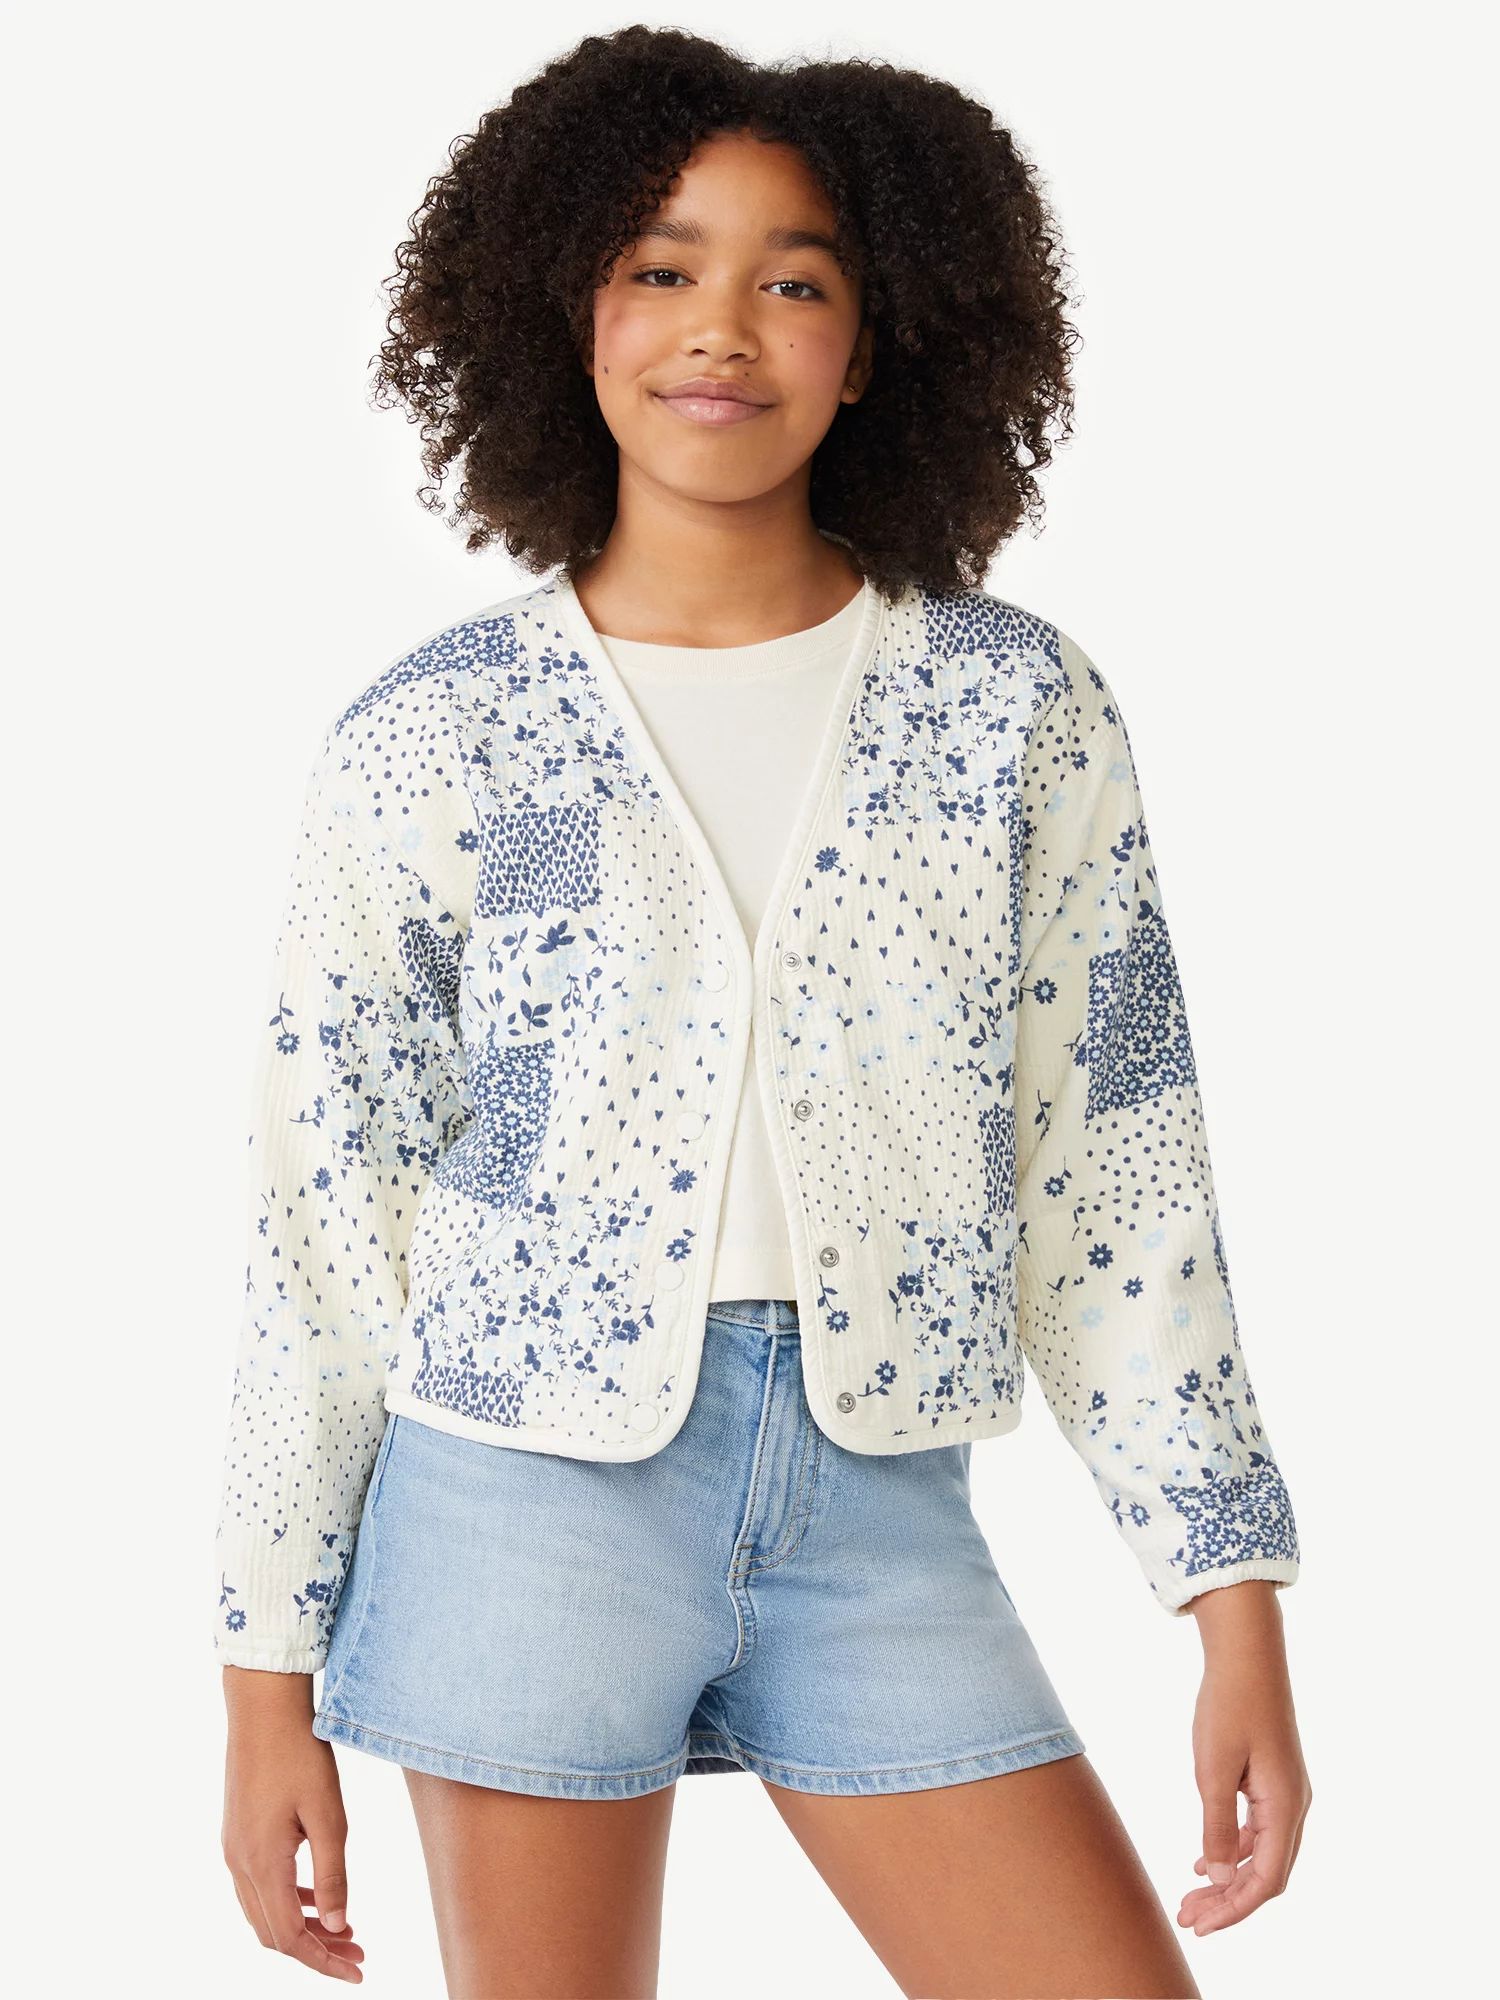 Free Assembly Girls Quilted Woven Print Cardigan, Sizes 4-18 | Walmart (US)